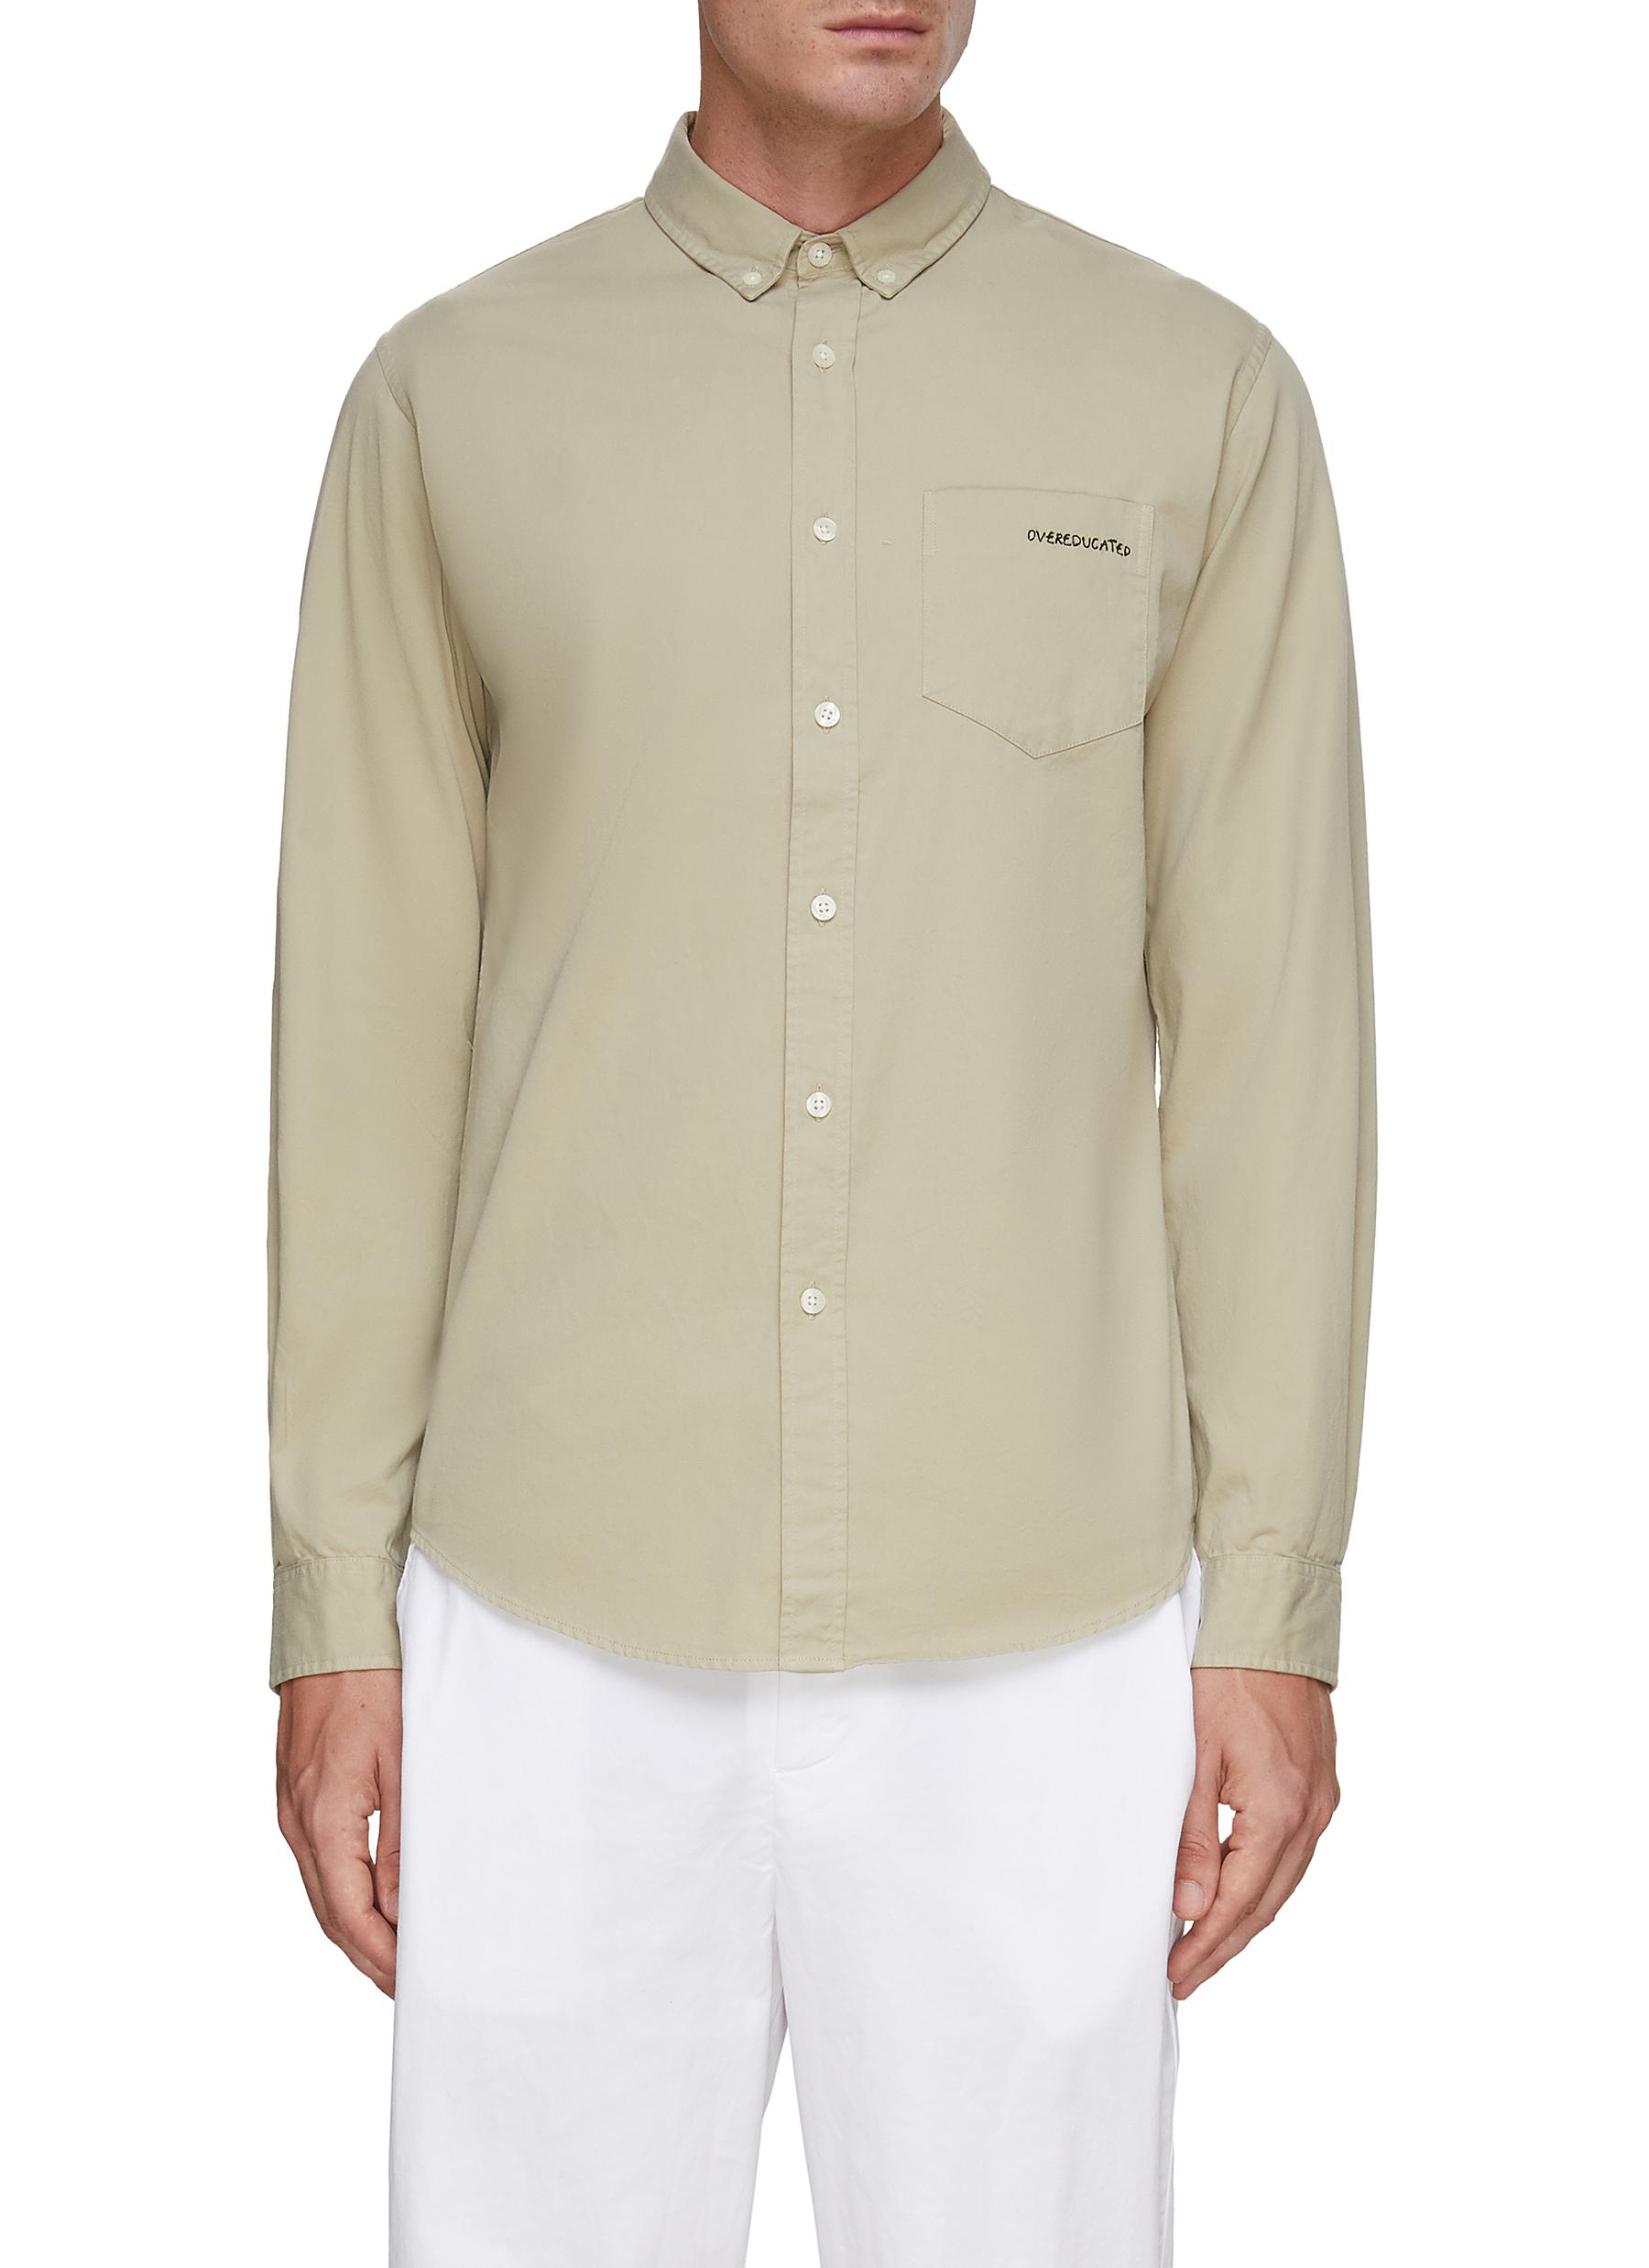 Le Bonne Graine Overeducated Embroidery Shirt